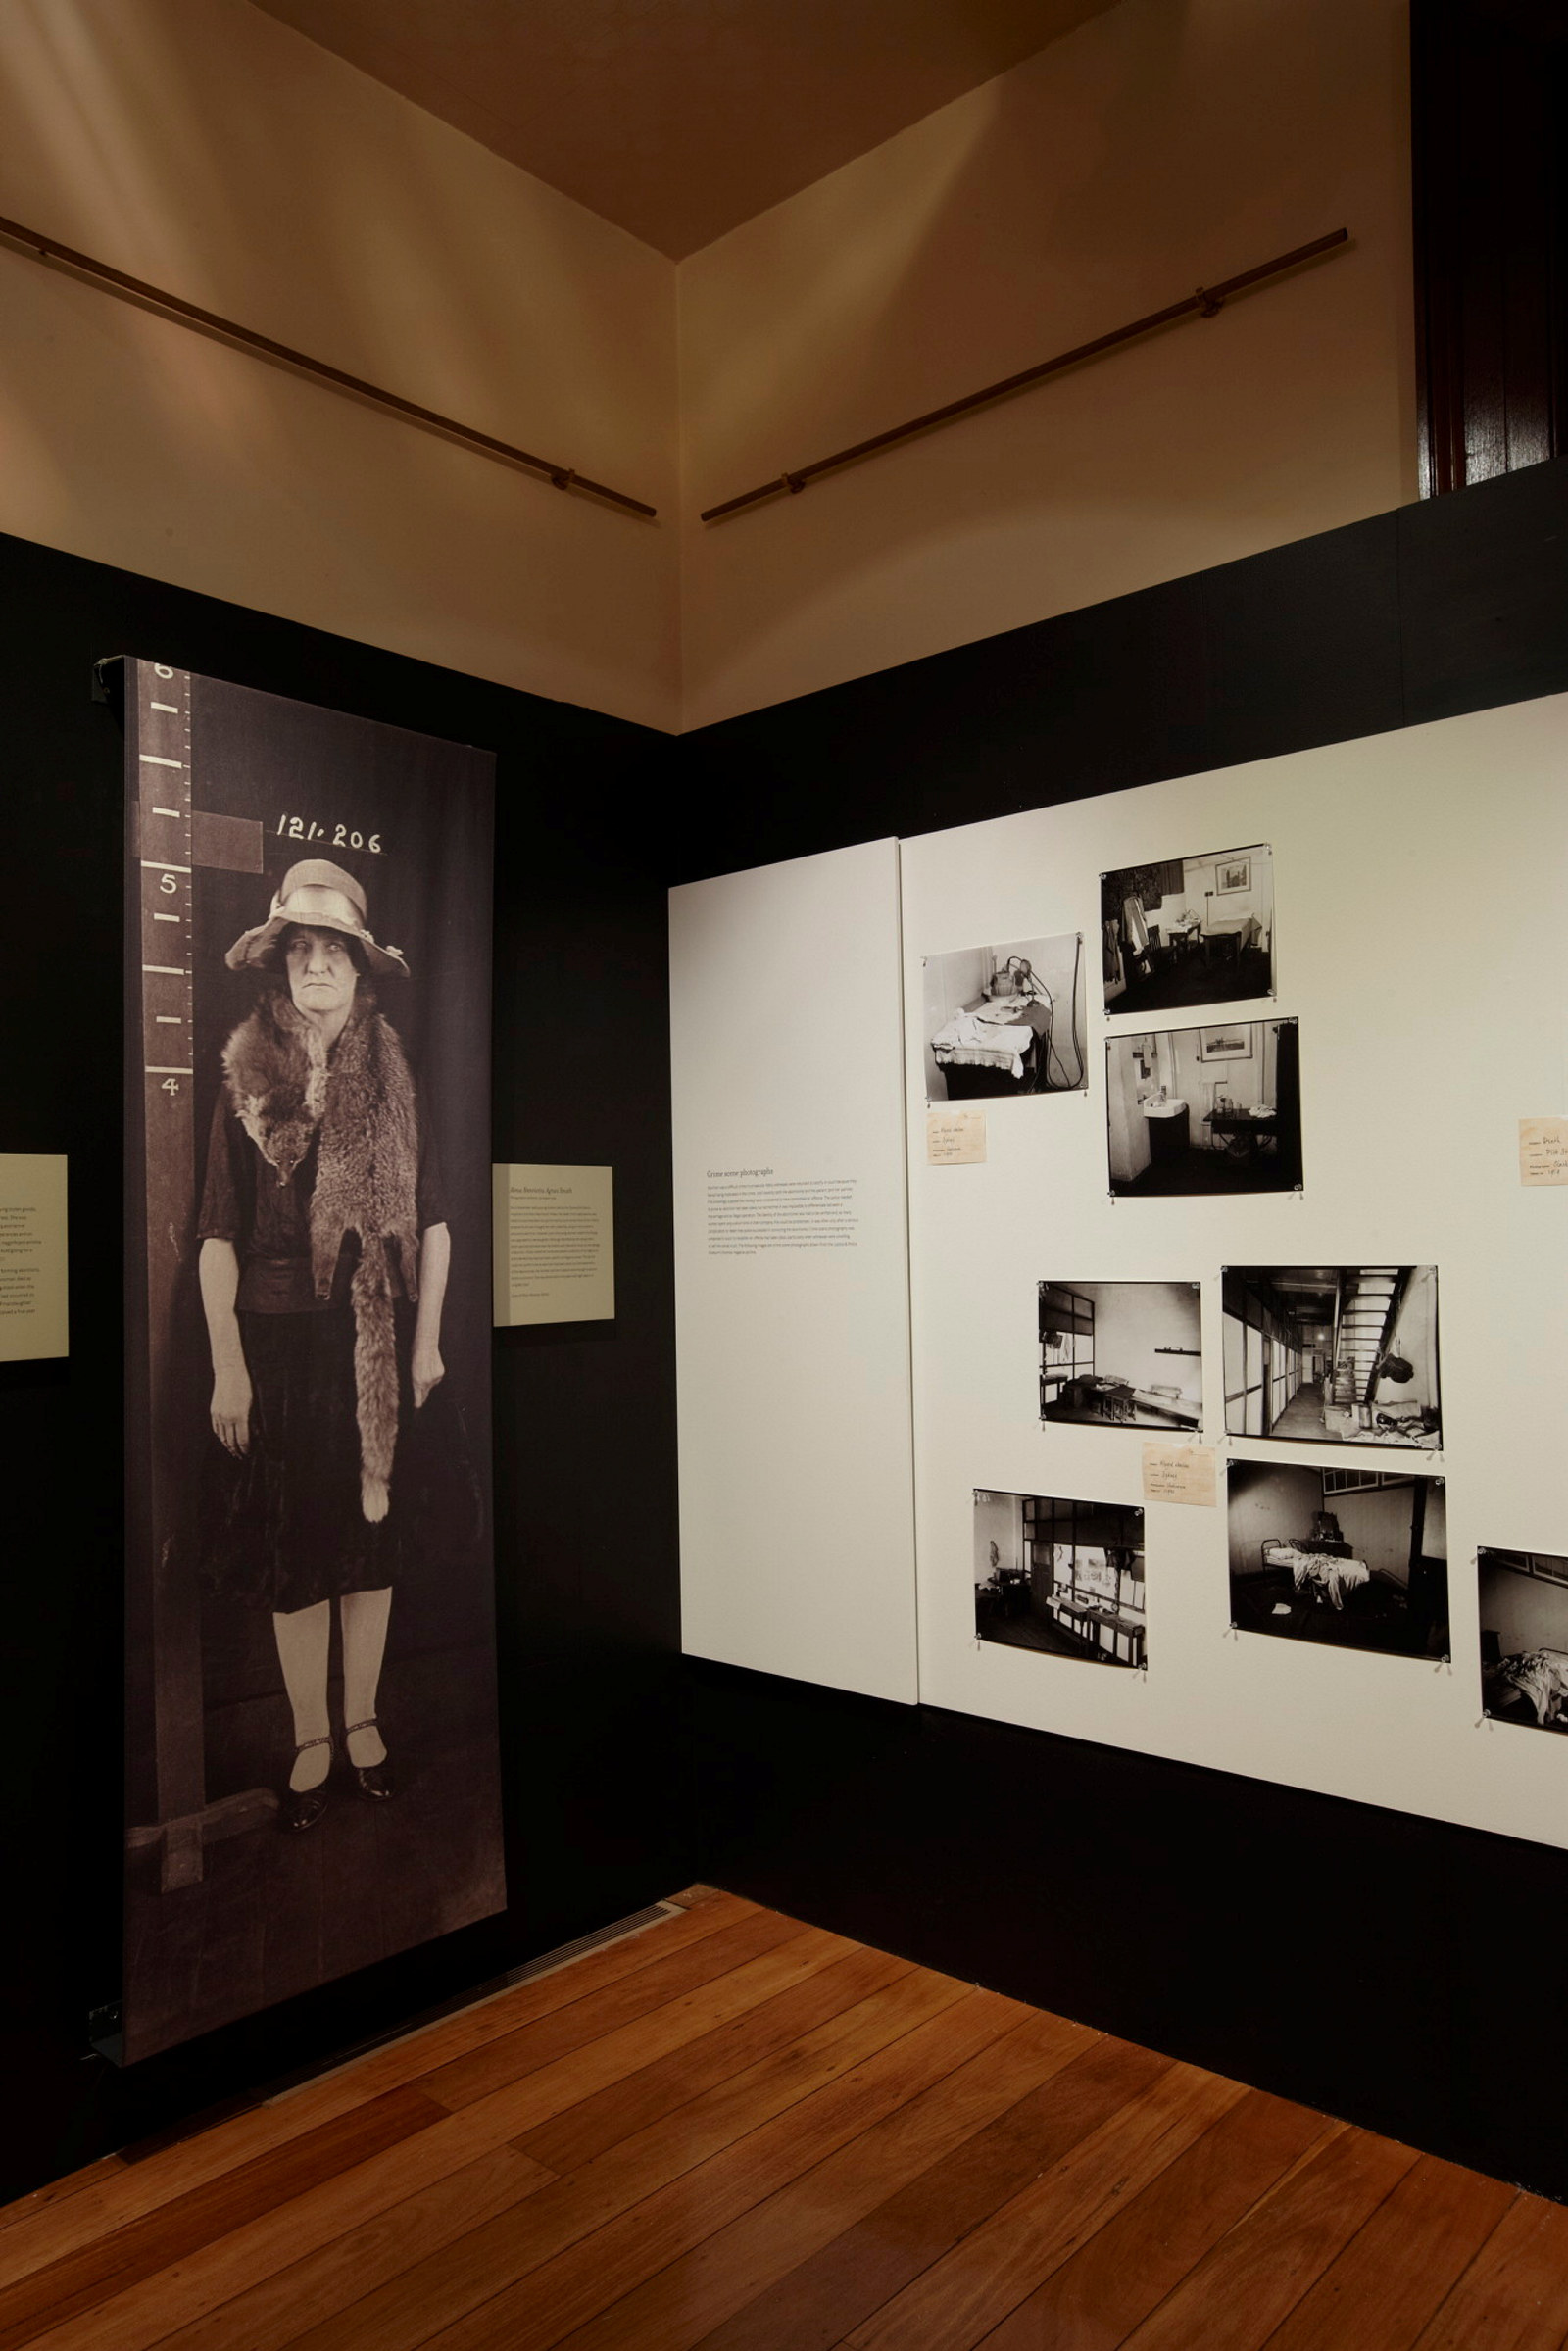 Femme fatale: the female criminal exhibition installation view